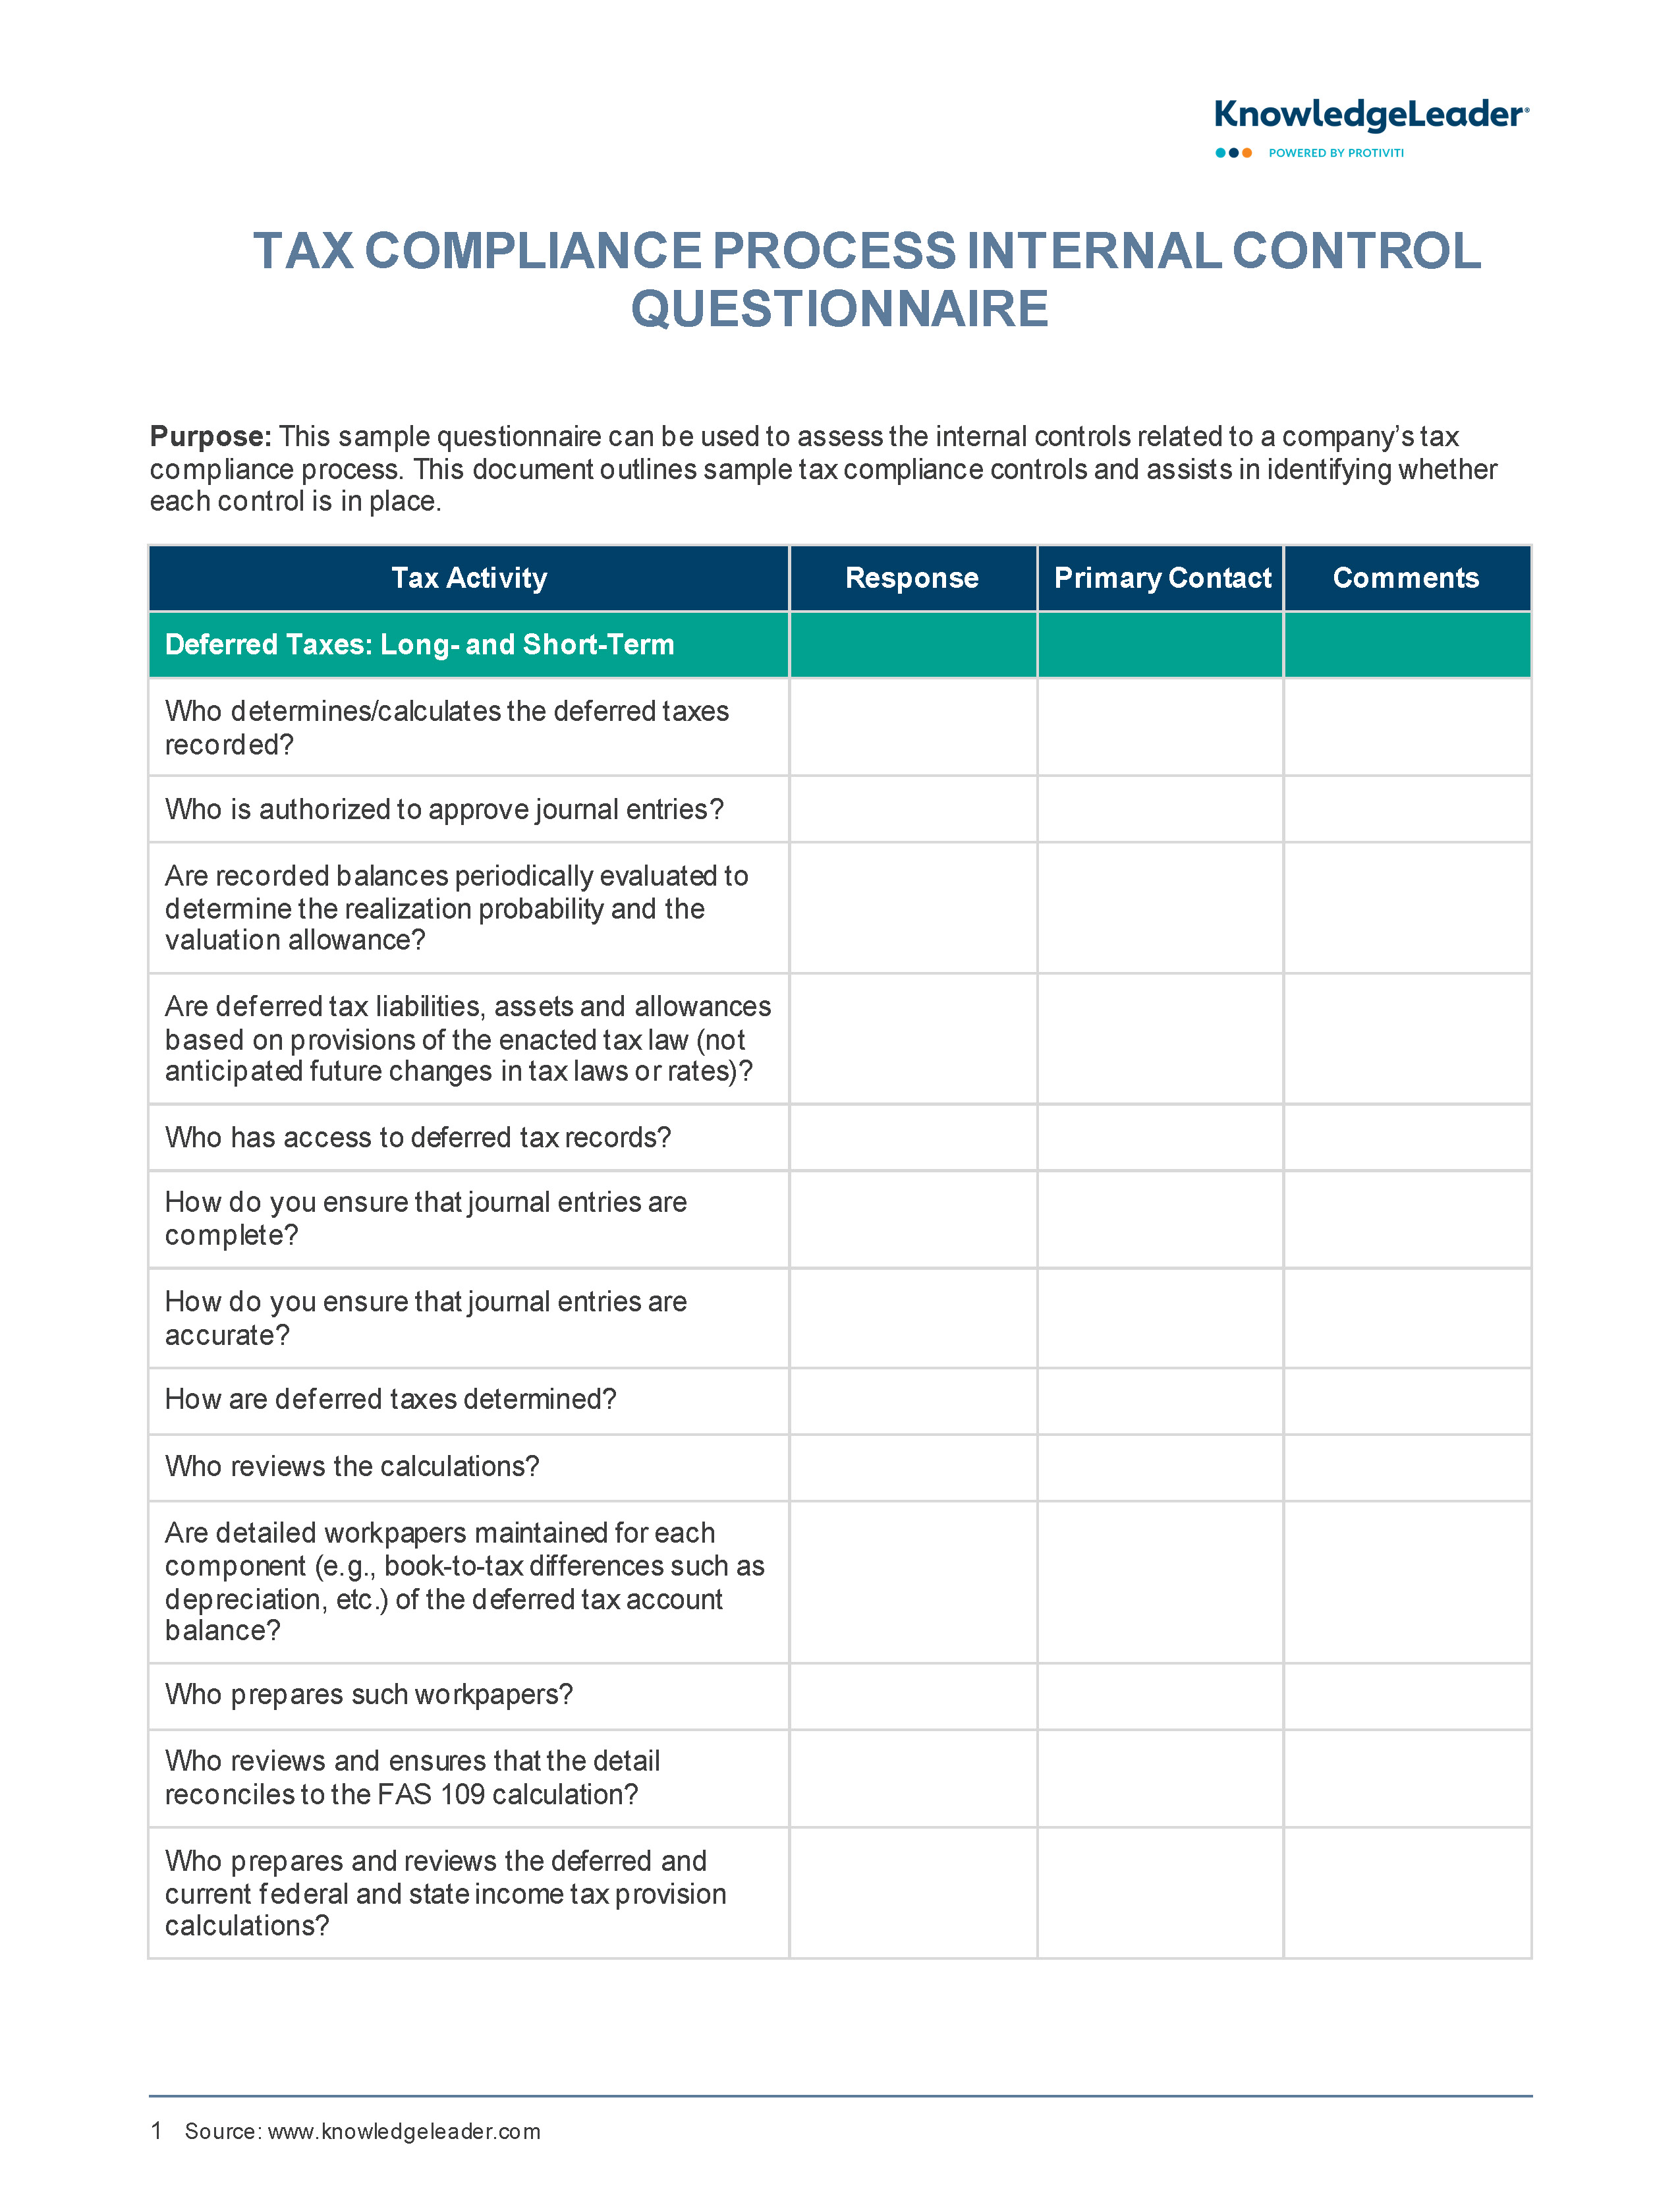 Screenshot of the first page of Tax Compliance Process Internal Control Questionnaire